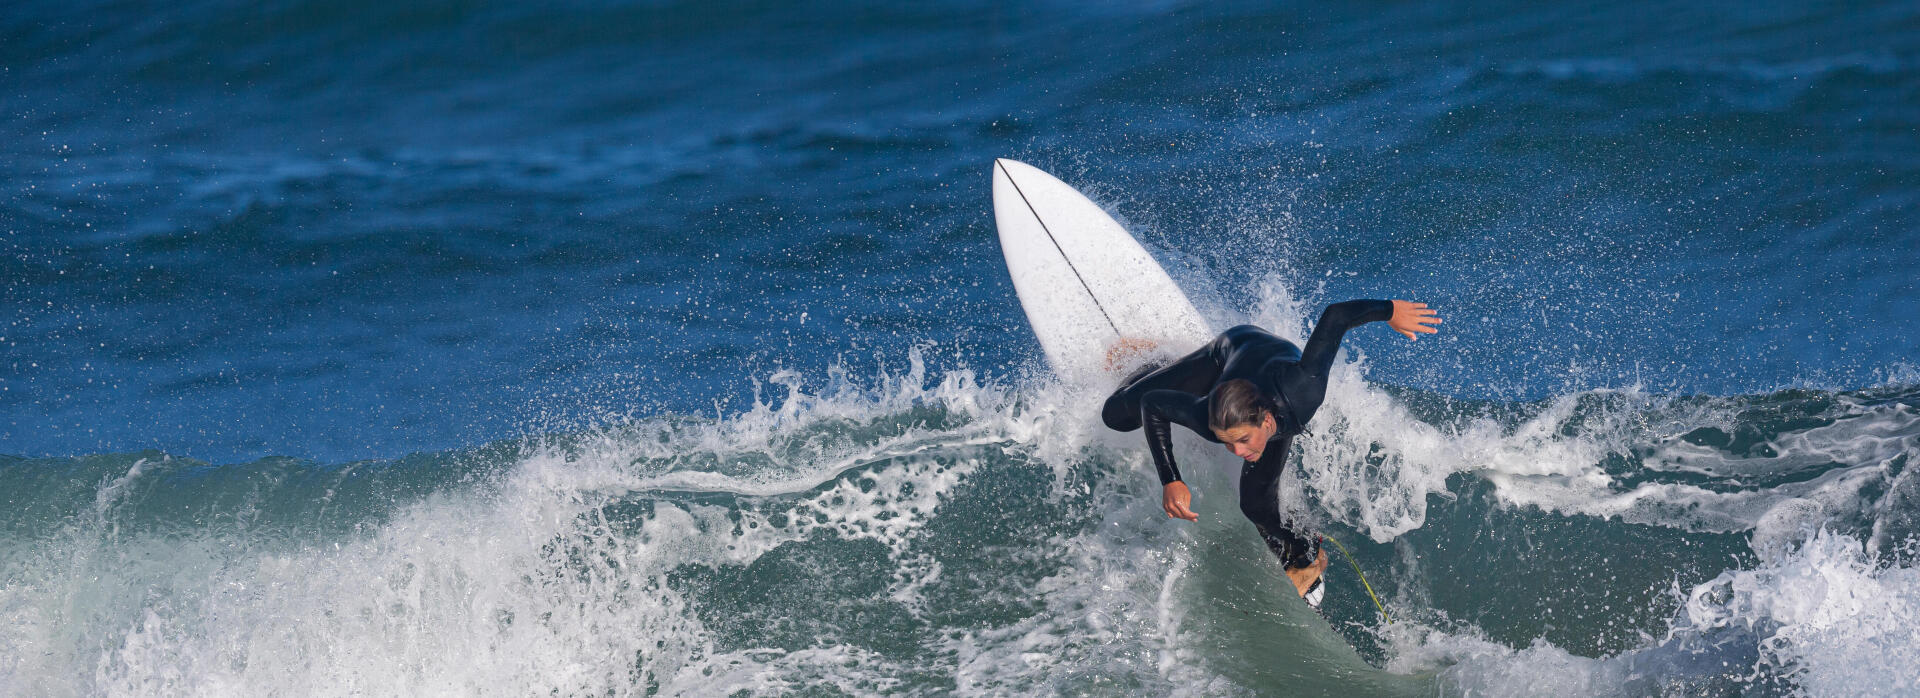 How to choose your surfing wetsuit